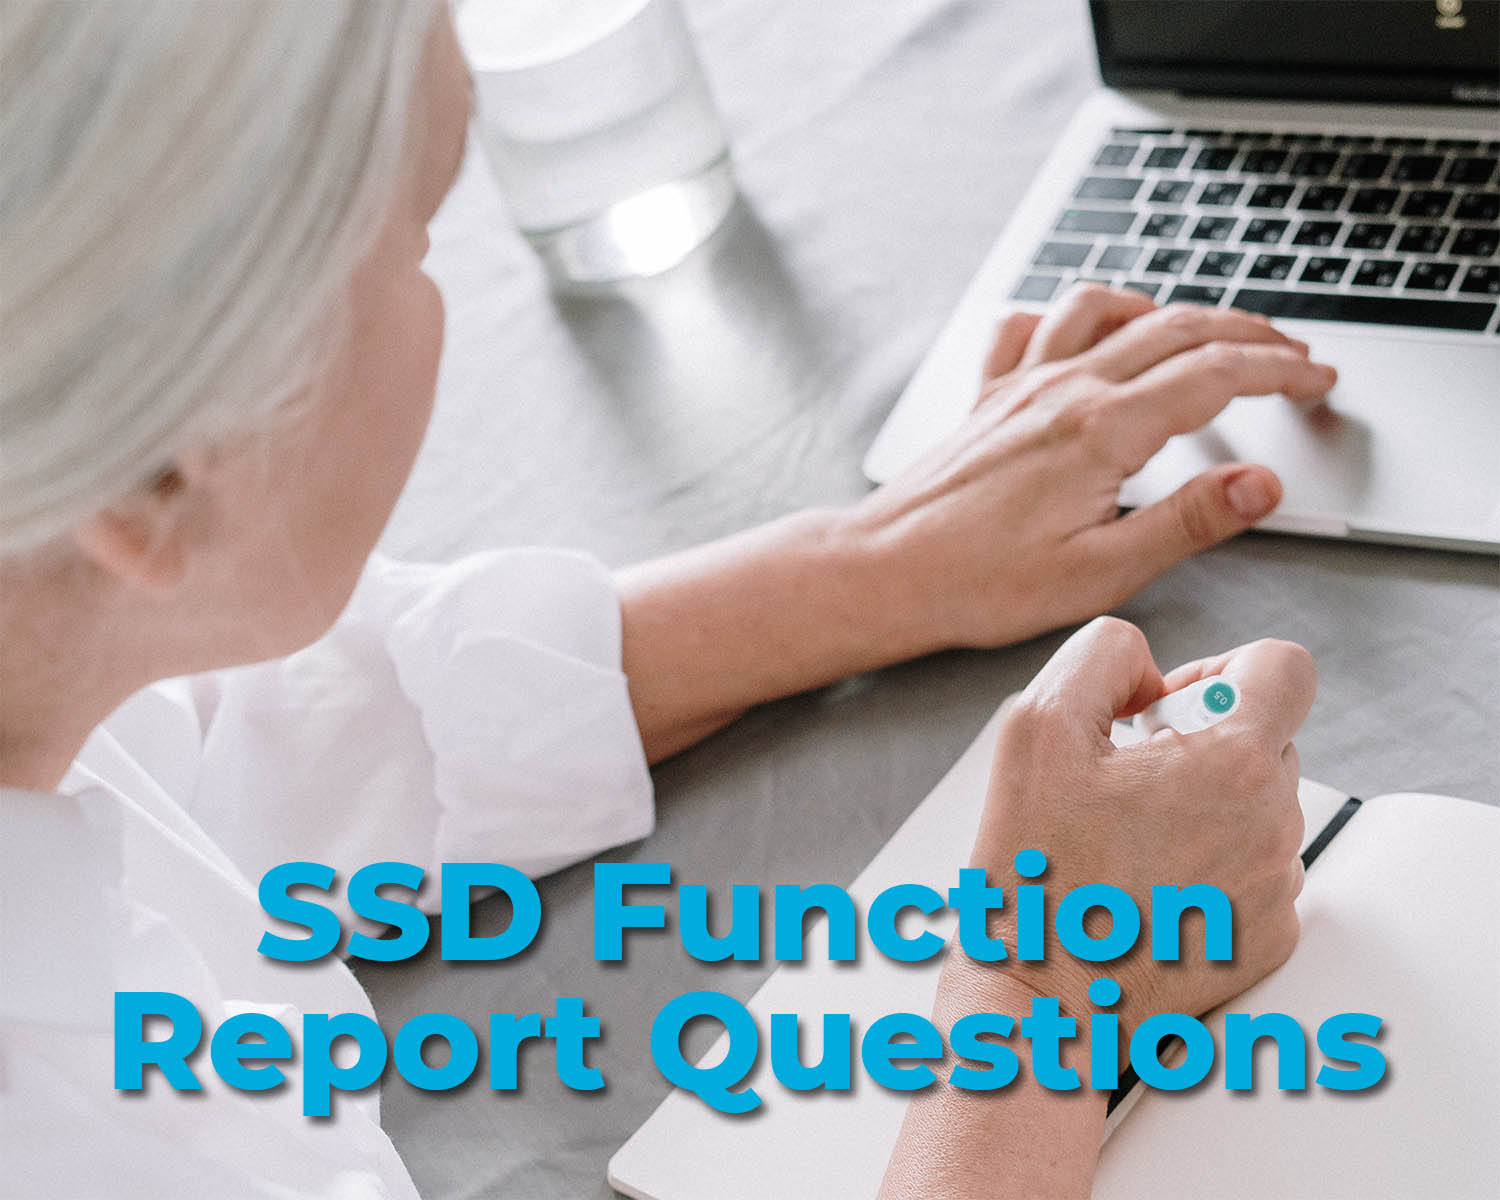 Woman filling out SSD Function Report